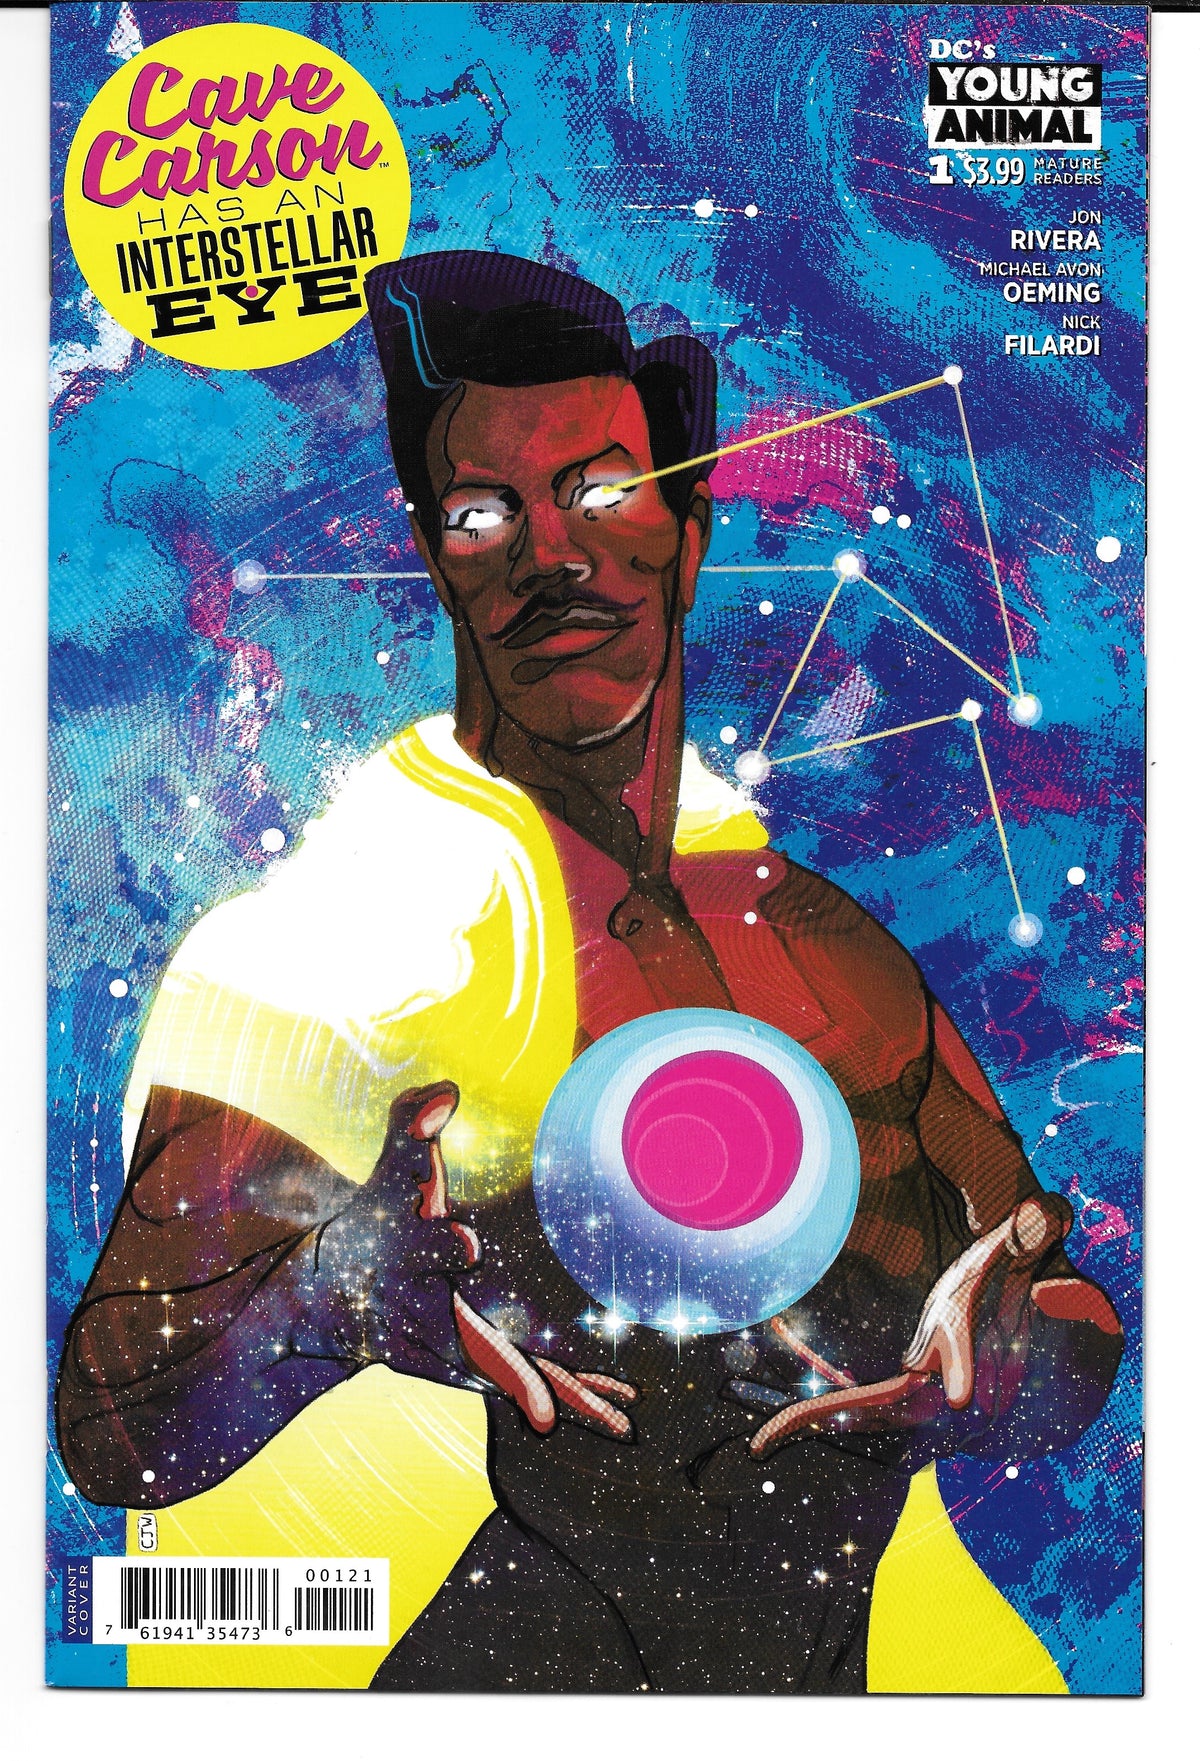 Photo of Cave Carson Has An Interstellar Eye (2018) Issue 1B - Near Mint Comic sold by Stronghold Collectibles